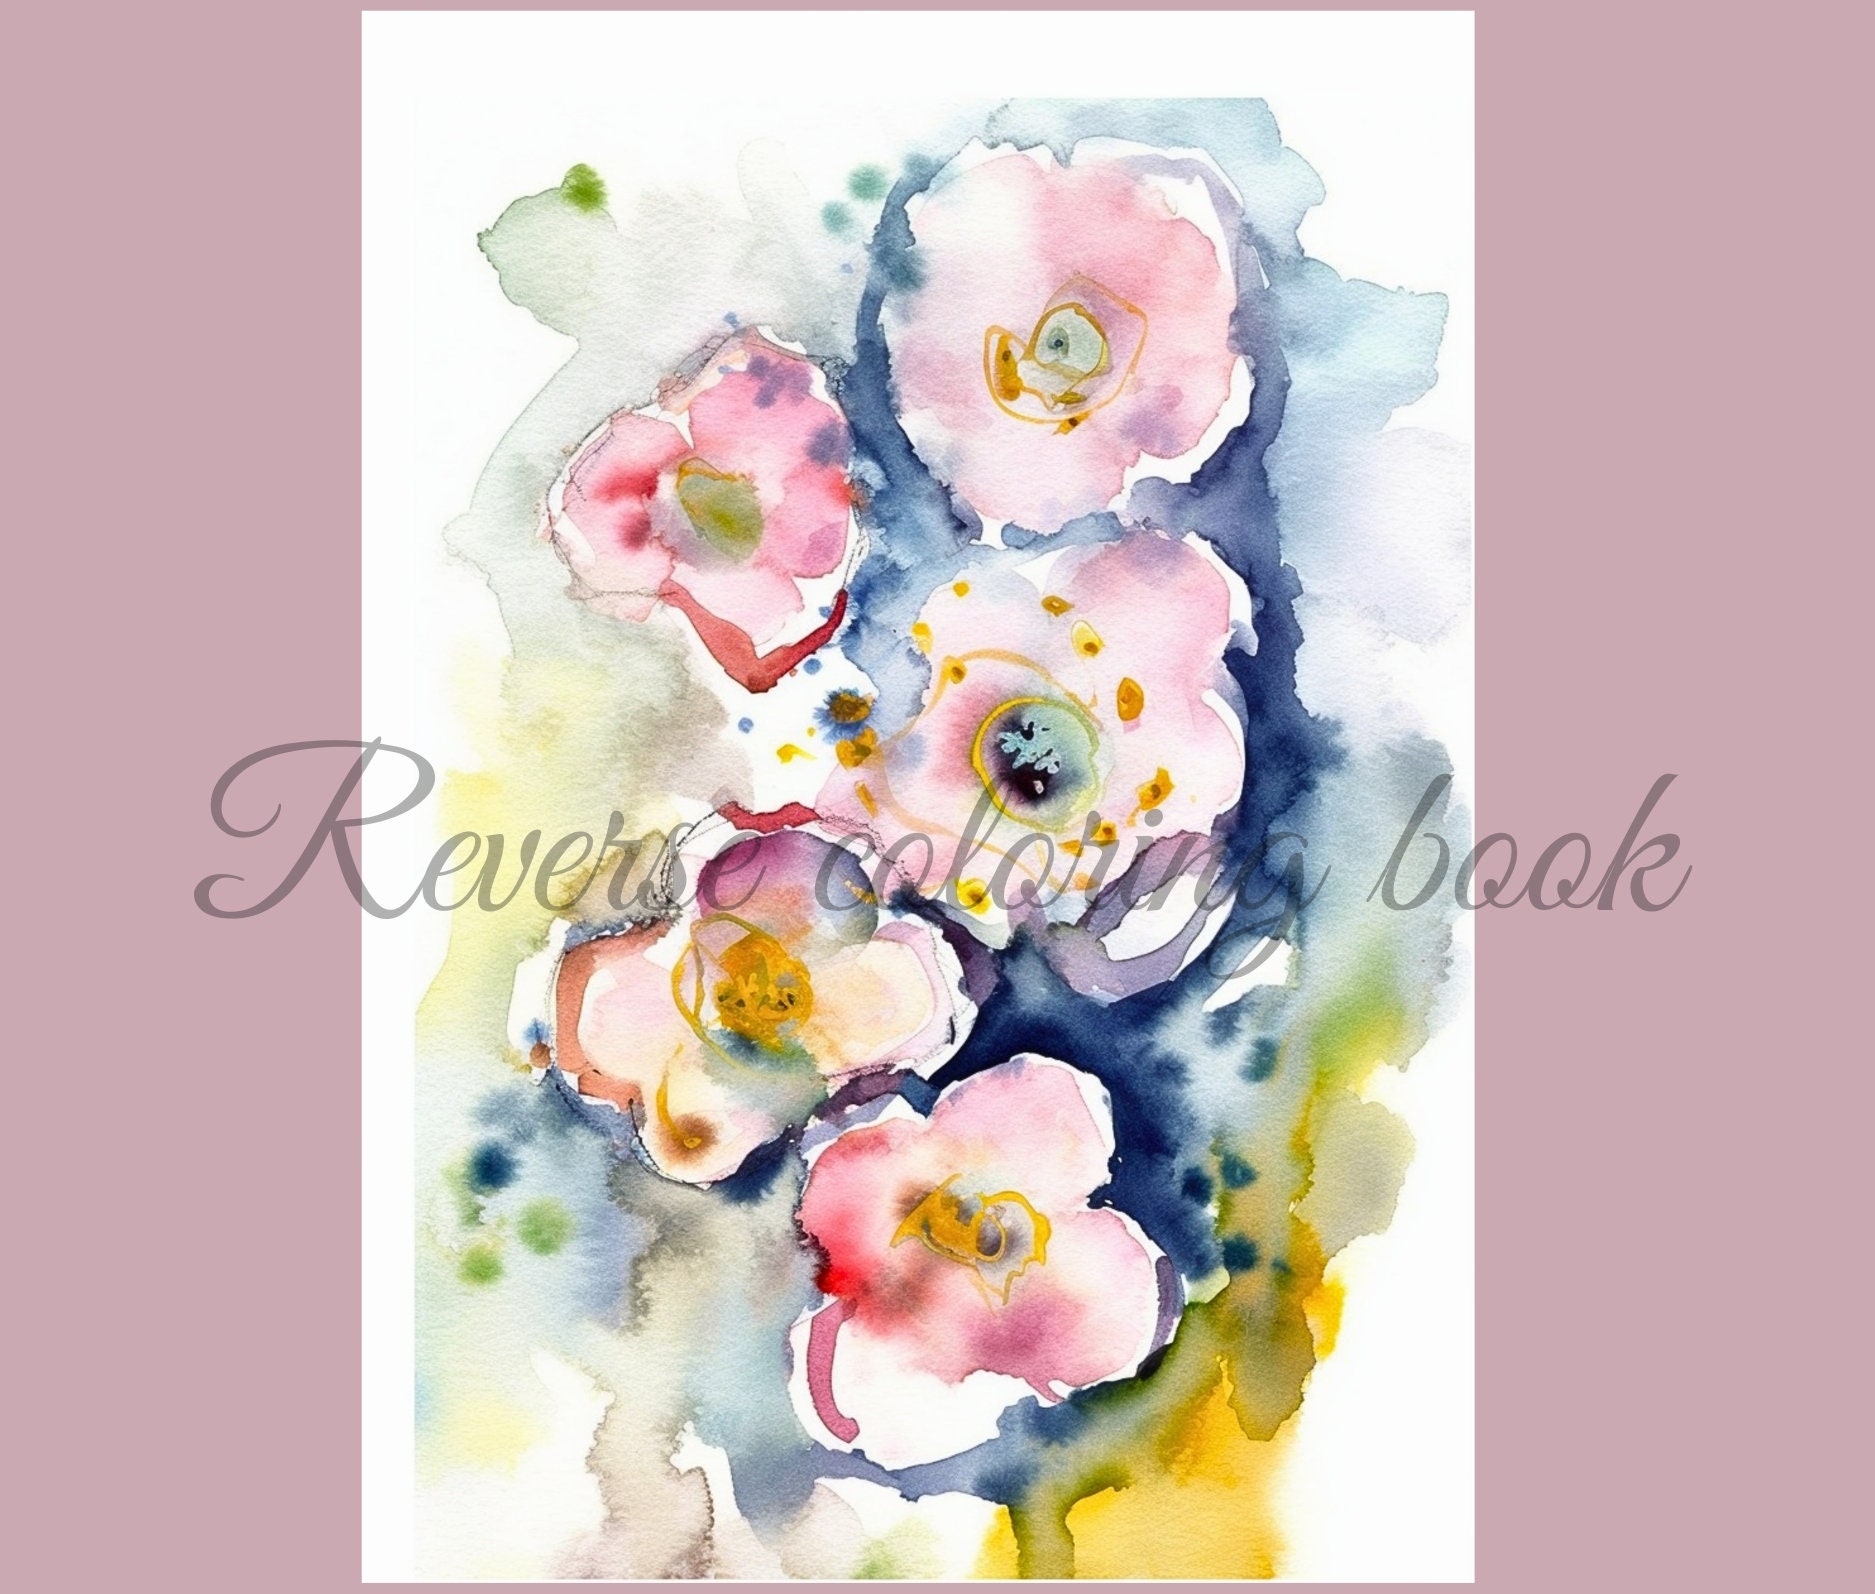 Flowers Reverse Coloring Book for Adults And Kids: Flowers Reverse Coloring  Book, You Draw The Lines coloring book, The Inverse Coloring Book by  Nicole Aspher